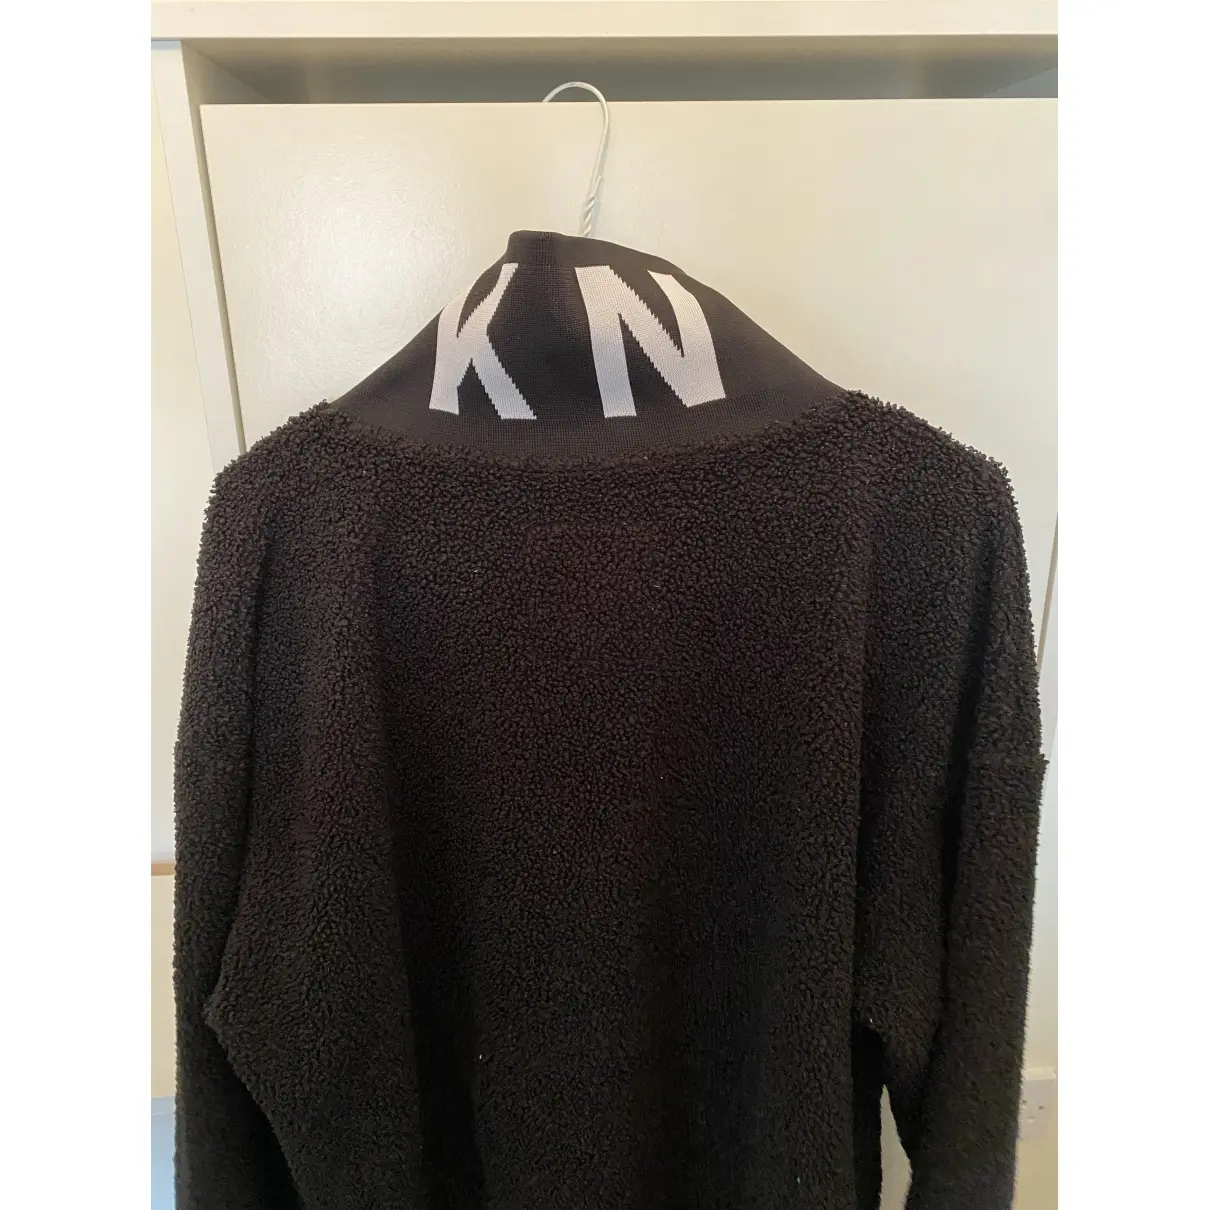 Dkny Jumper for sale